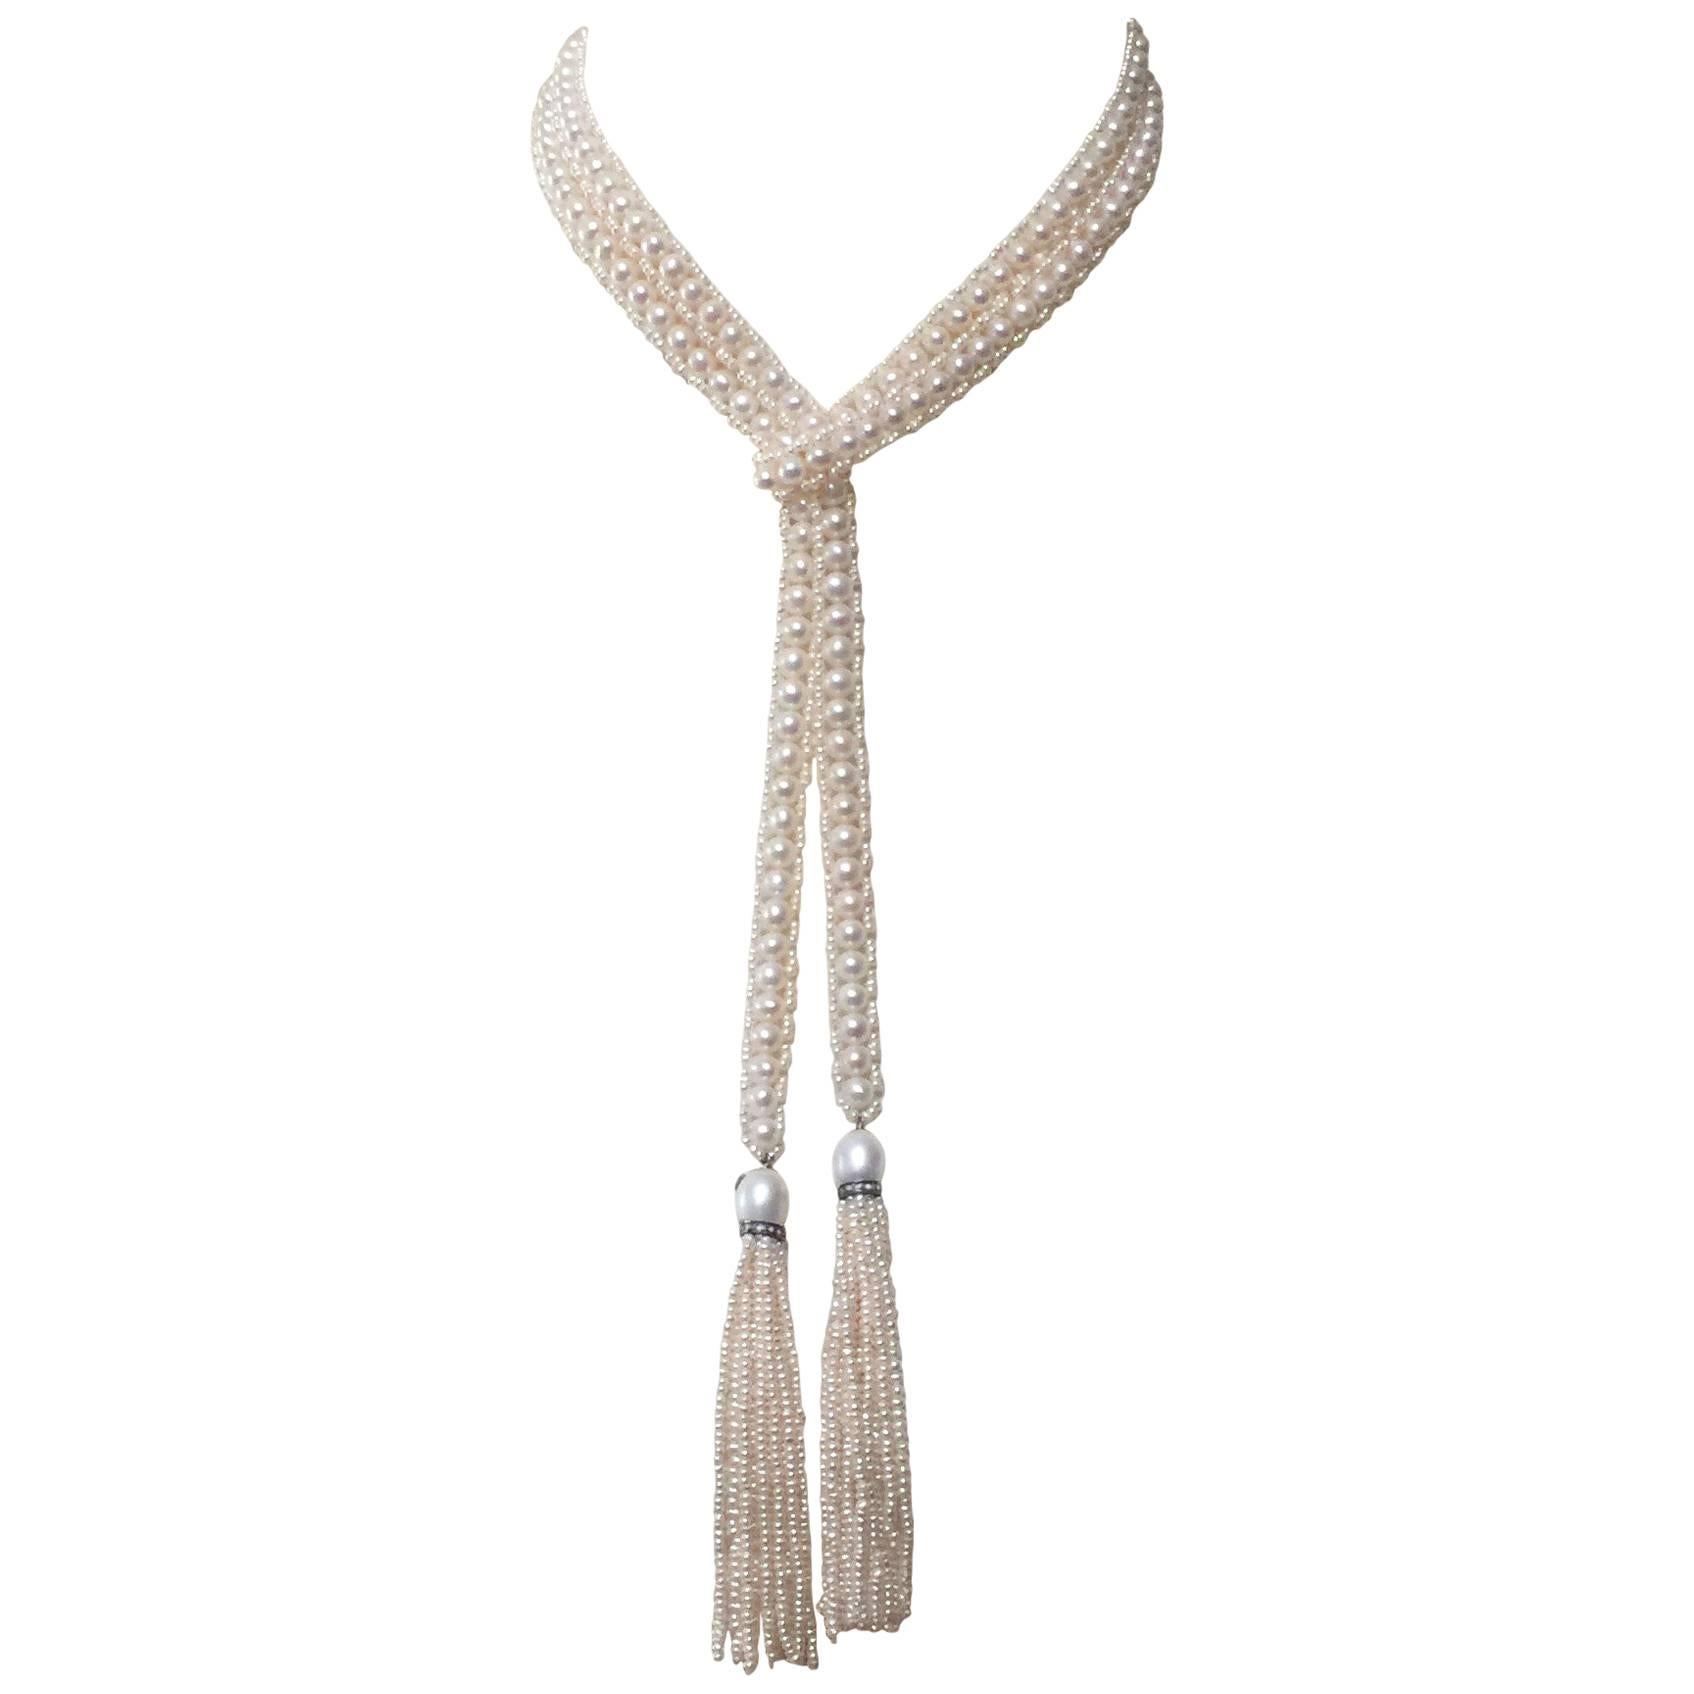 Marina J intricately Woven Pearl Sautoir with Pearl Tassels  Diamond rondales 